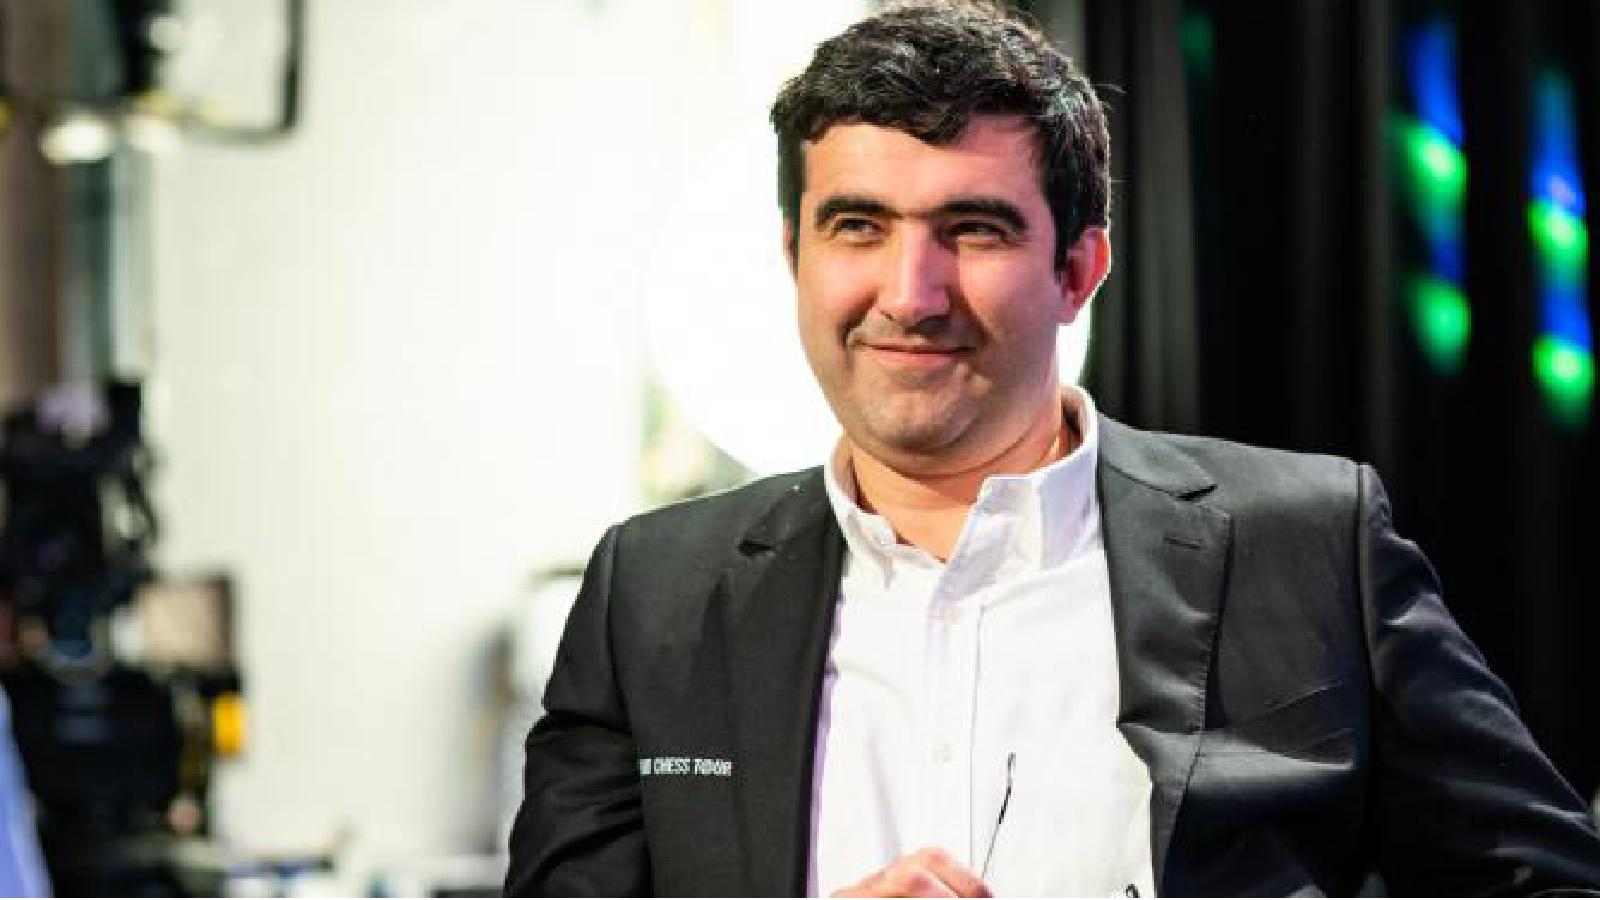 Vladimir Kramnik in a interview with Chess.com